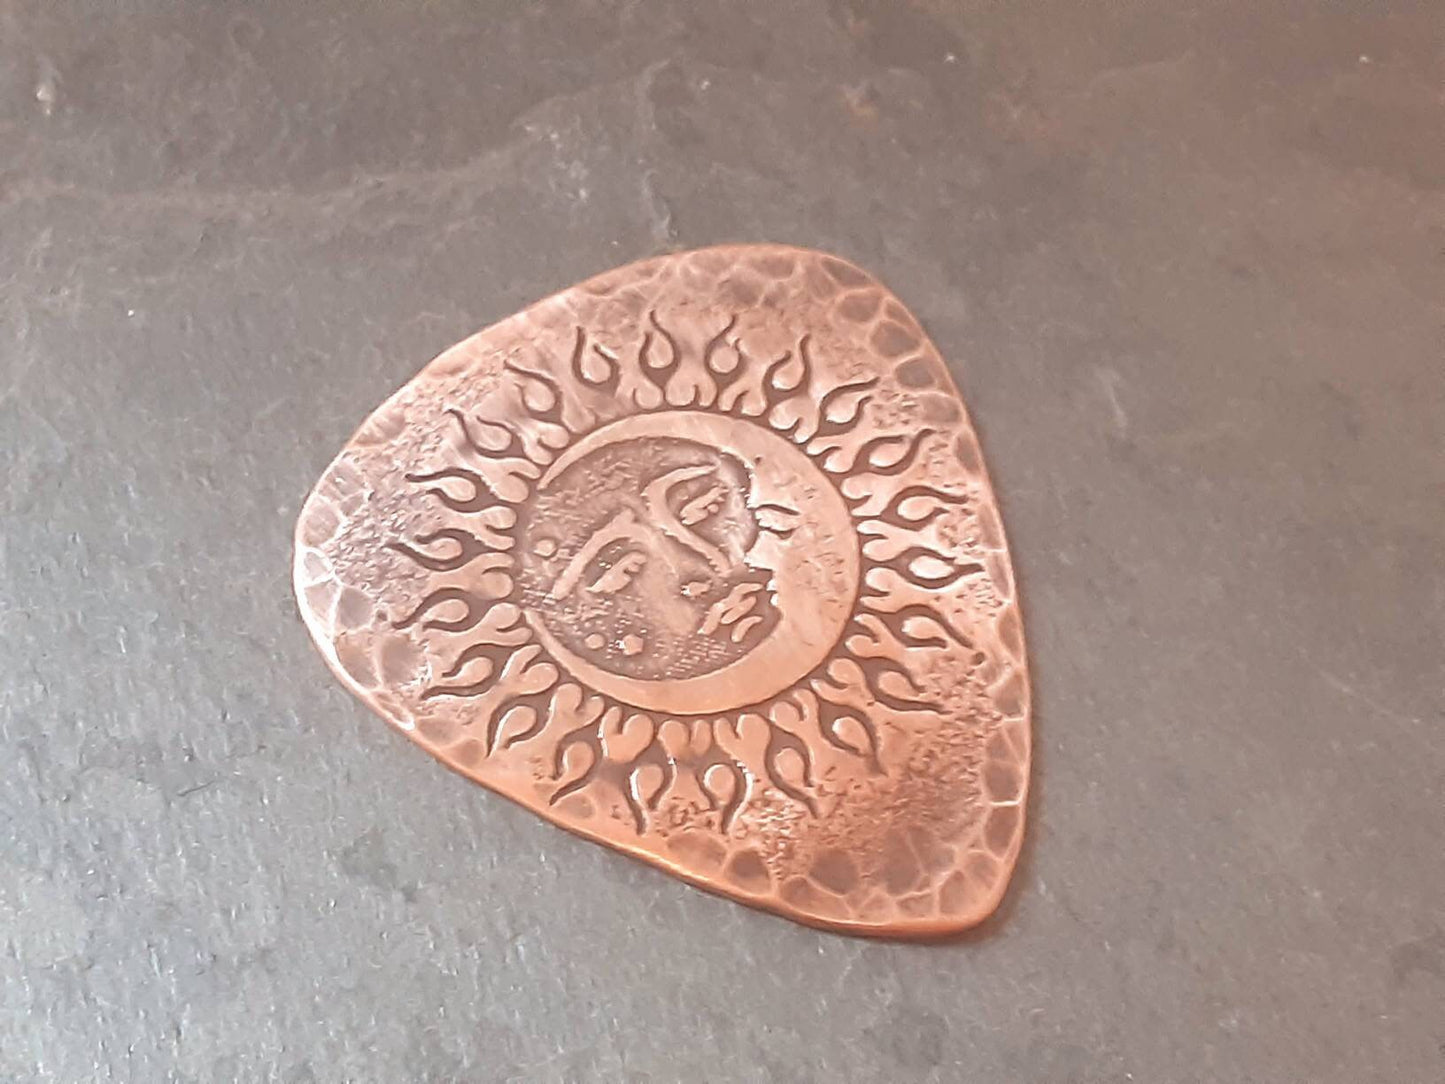 Copper guitar pick - playable